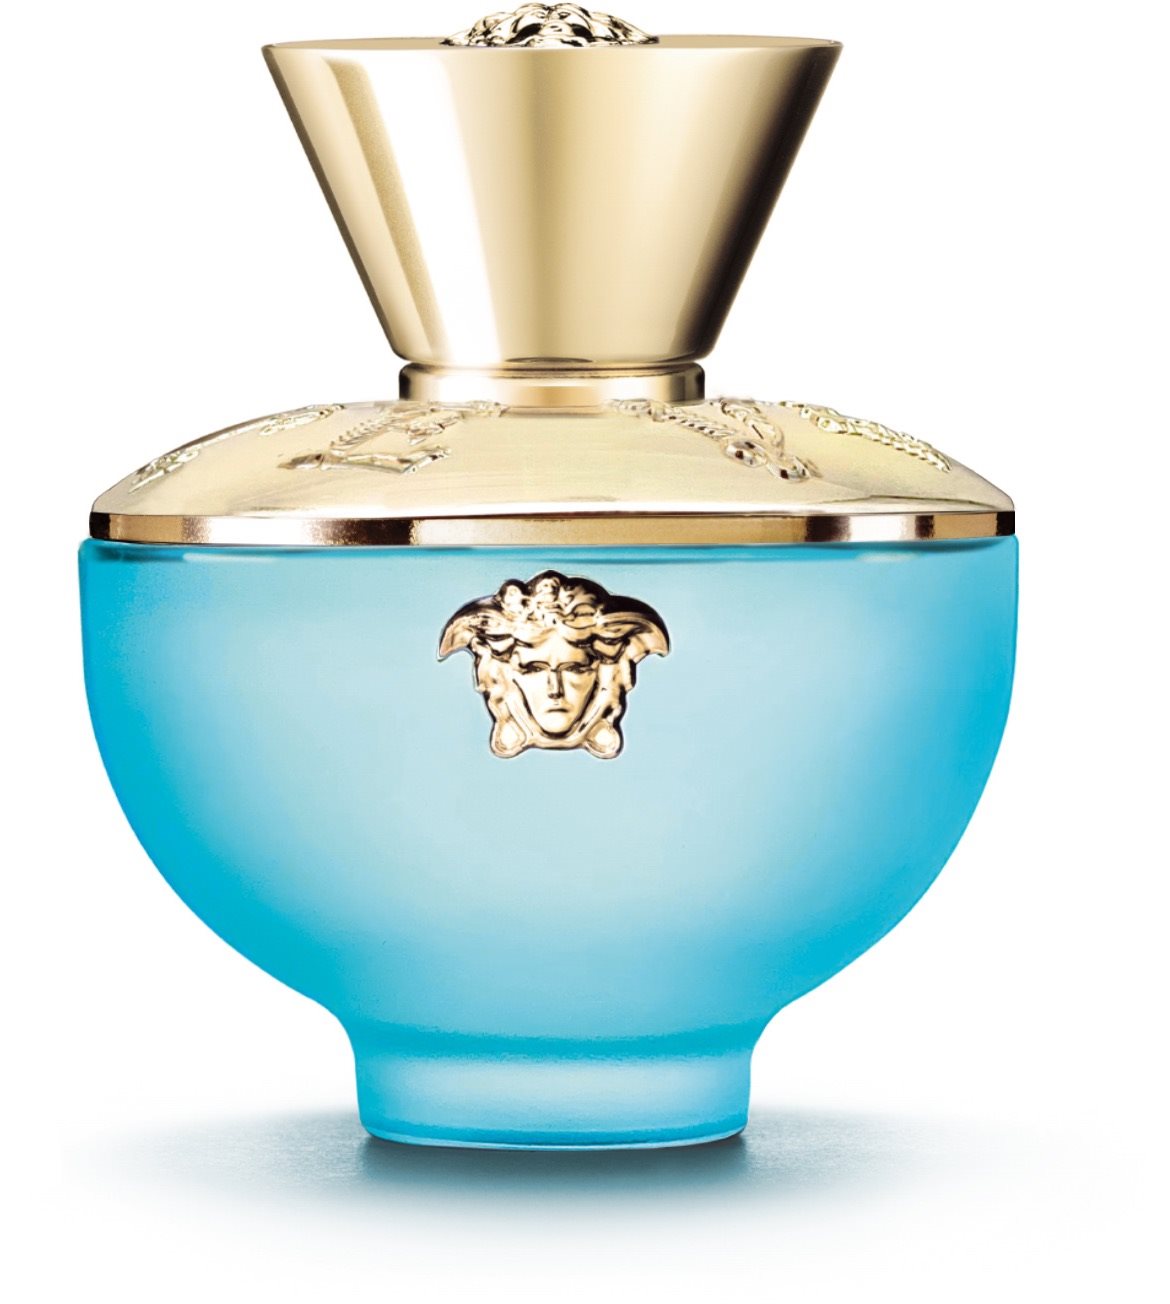 VERSACE Dylan Turquoise EdT 100 ml